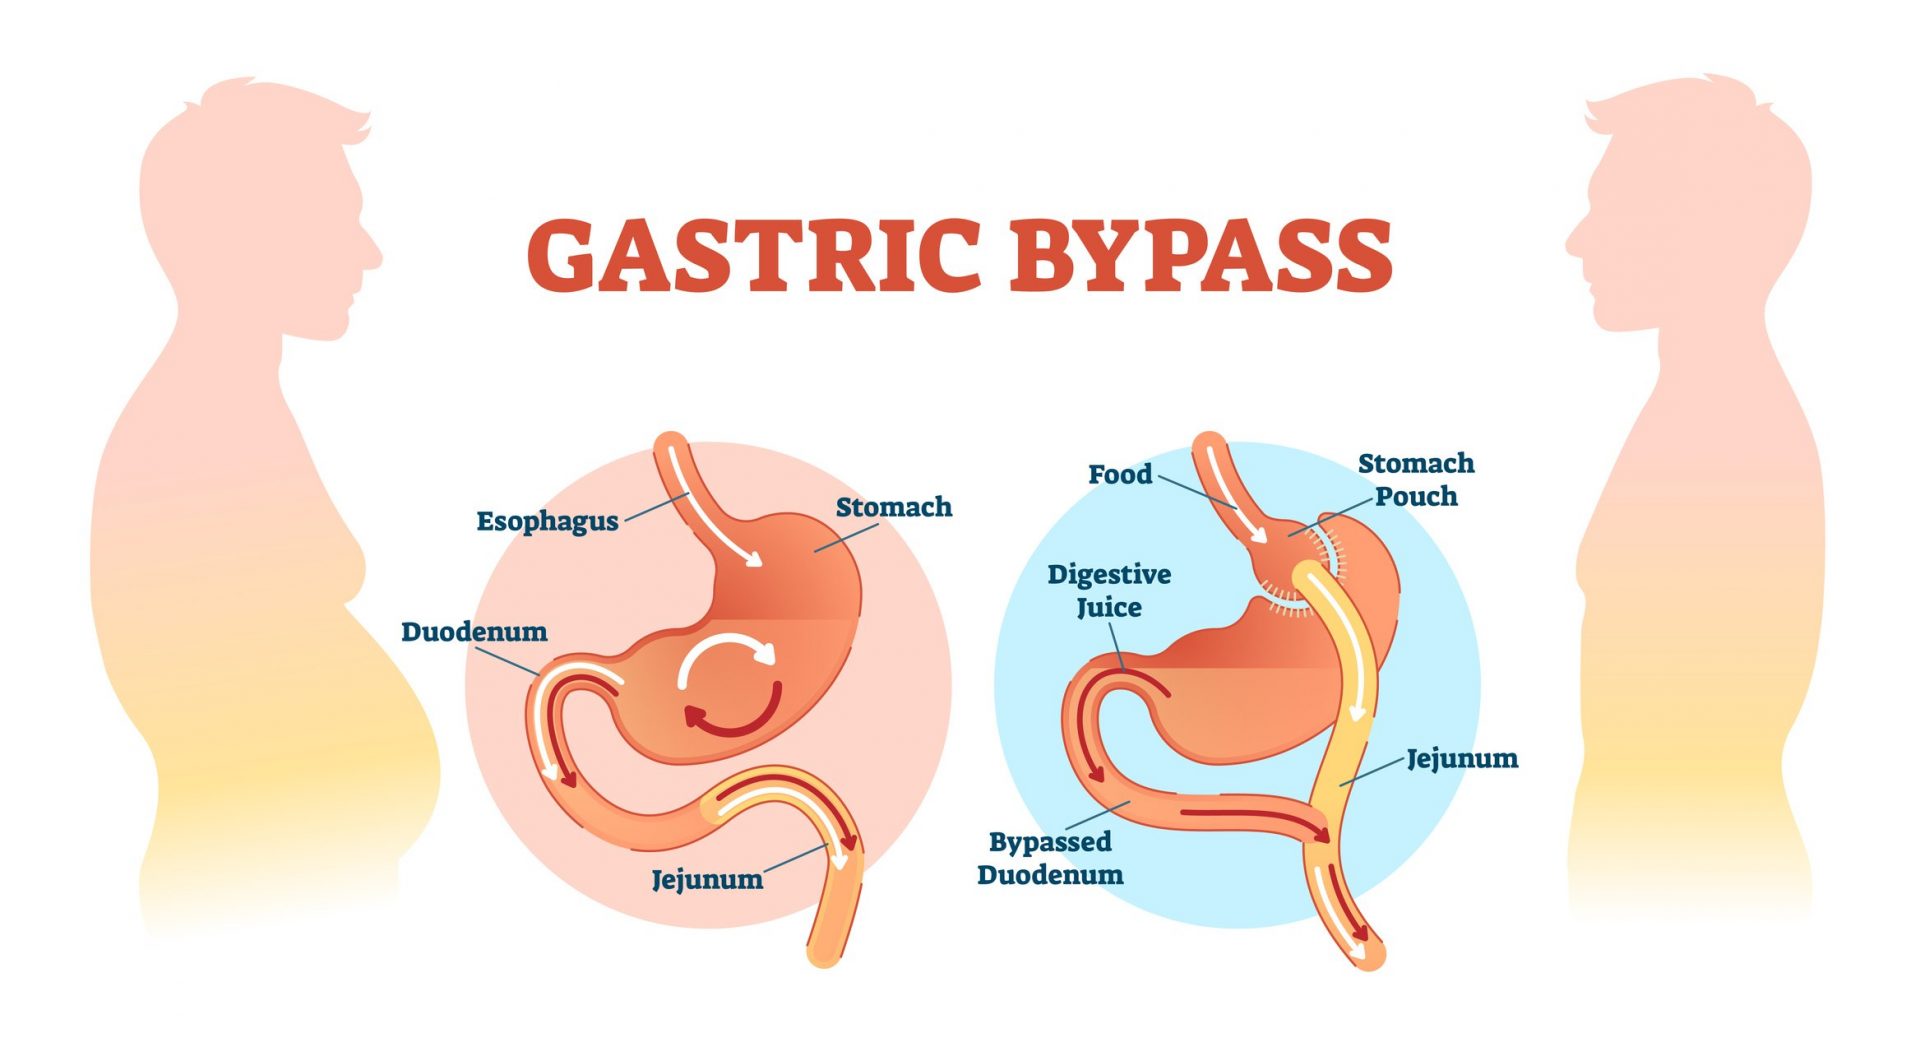 An image explaining the Gastric bypass surgery.